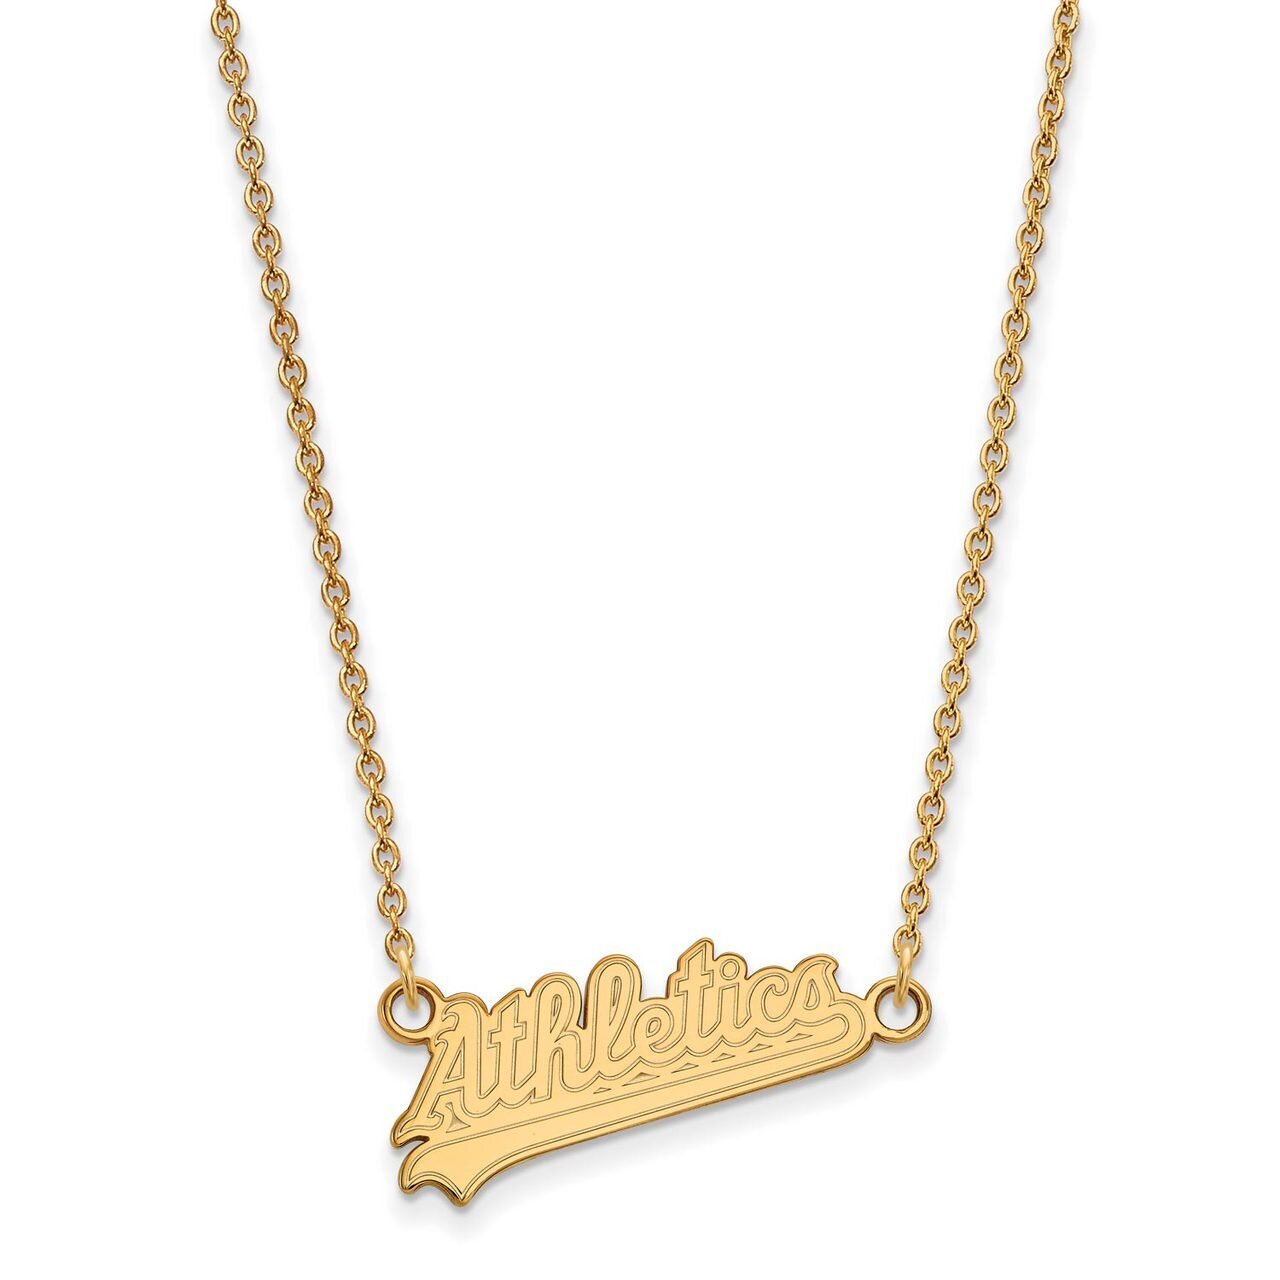 Oakland Athletics Small Pendant with Chain Necklace 14k Yellow Gold 4Y016ATH-18